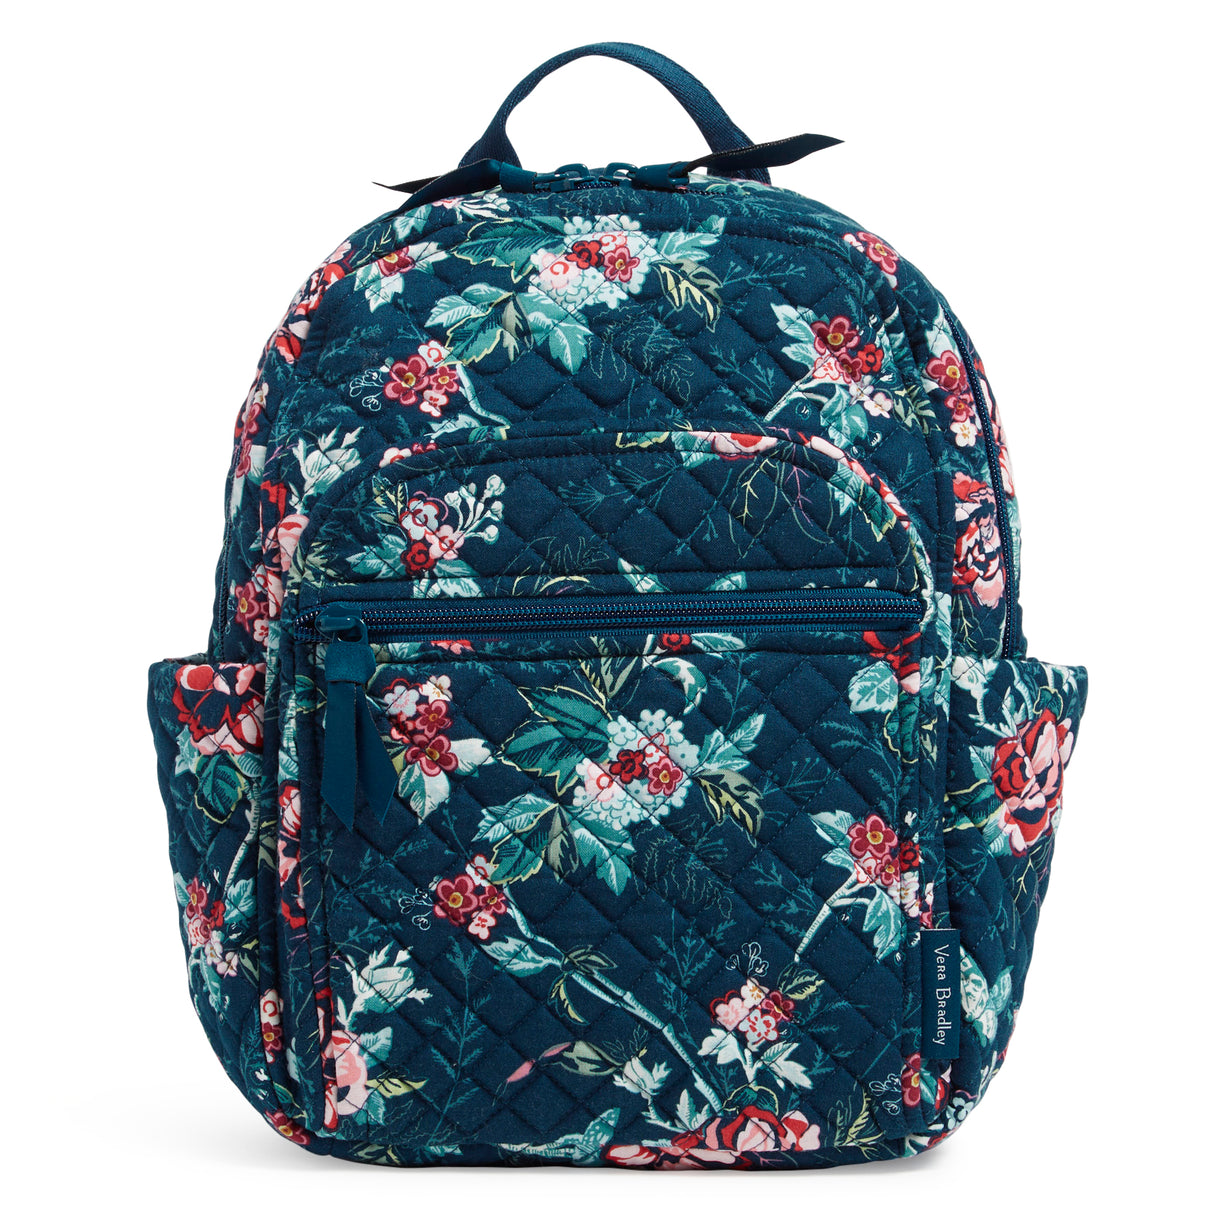 Vera Bradley small backpack in their Rose Toile pattern